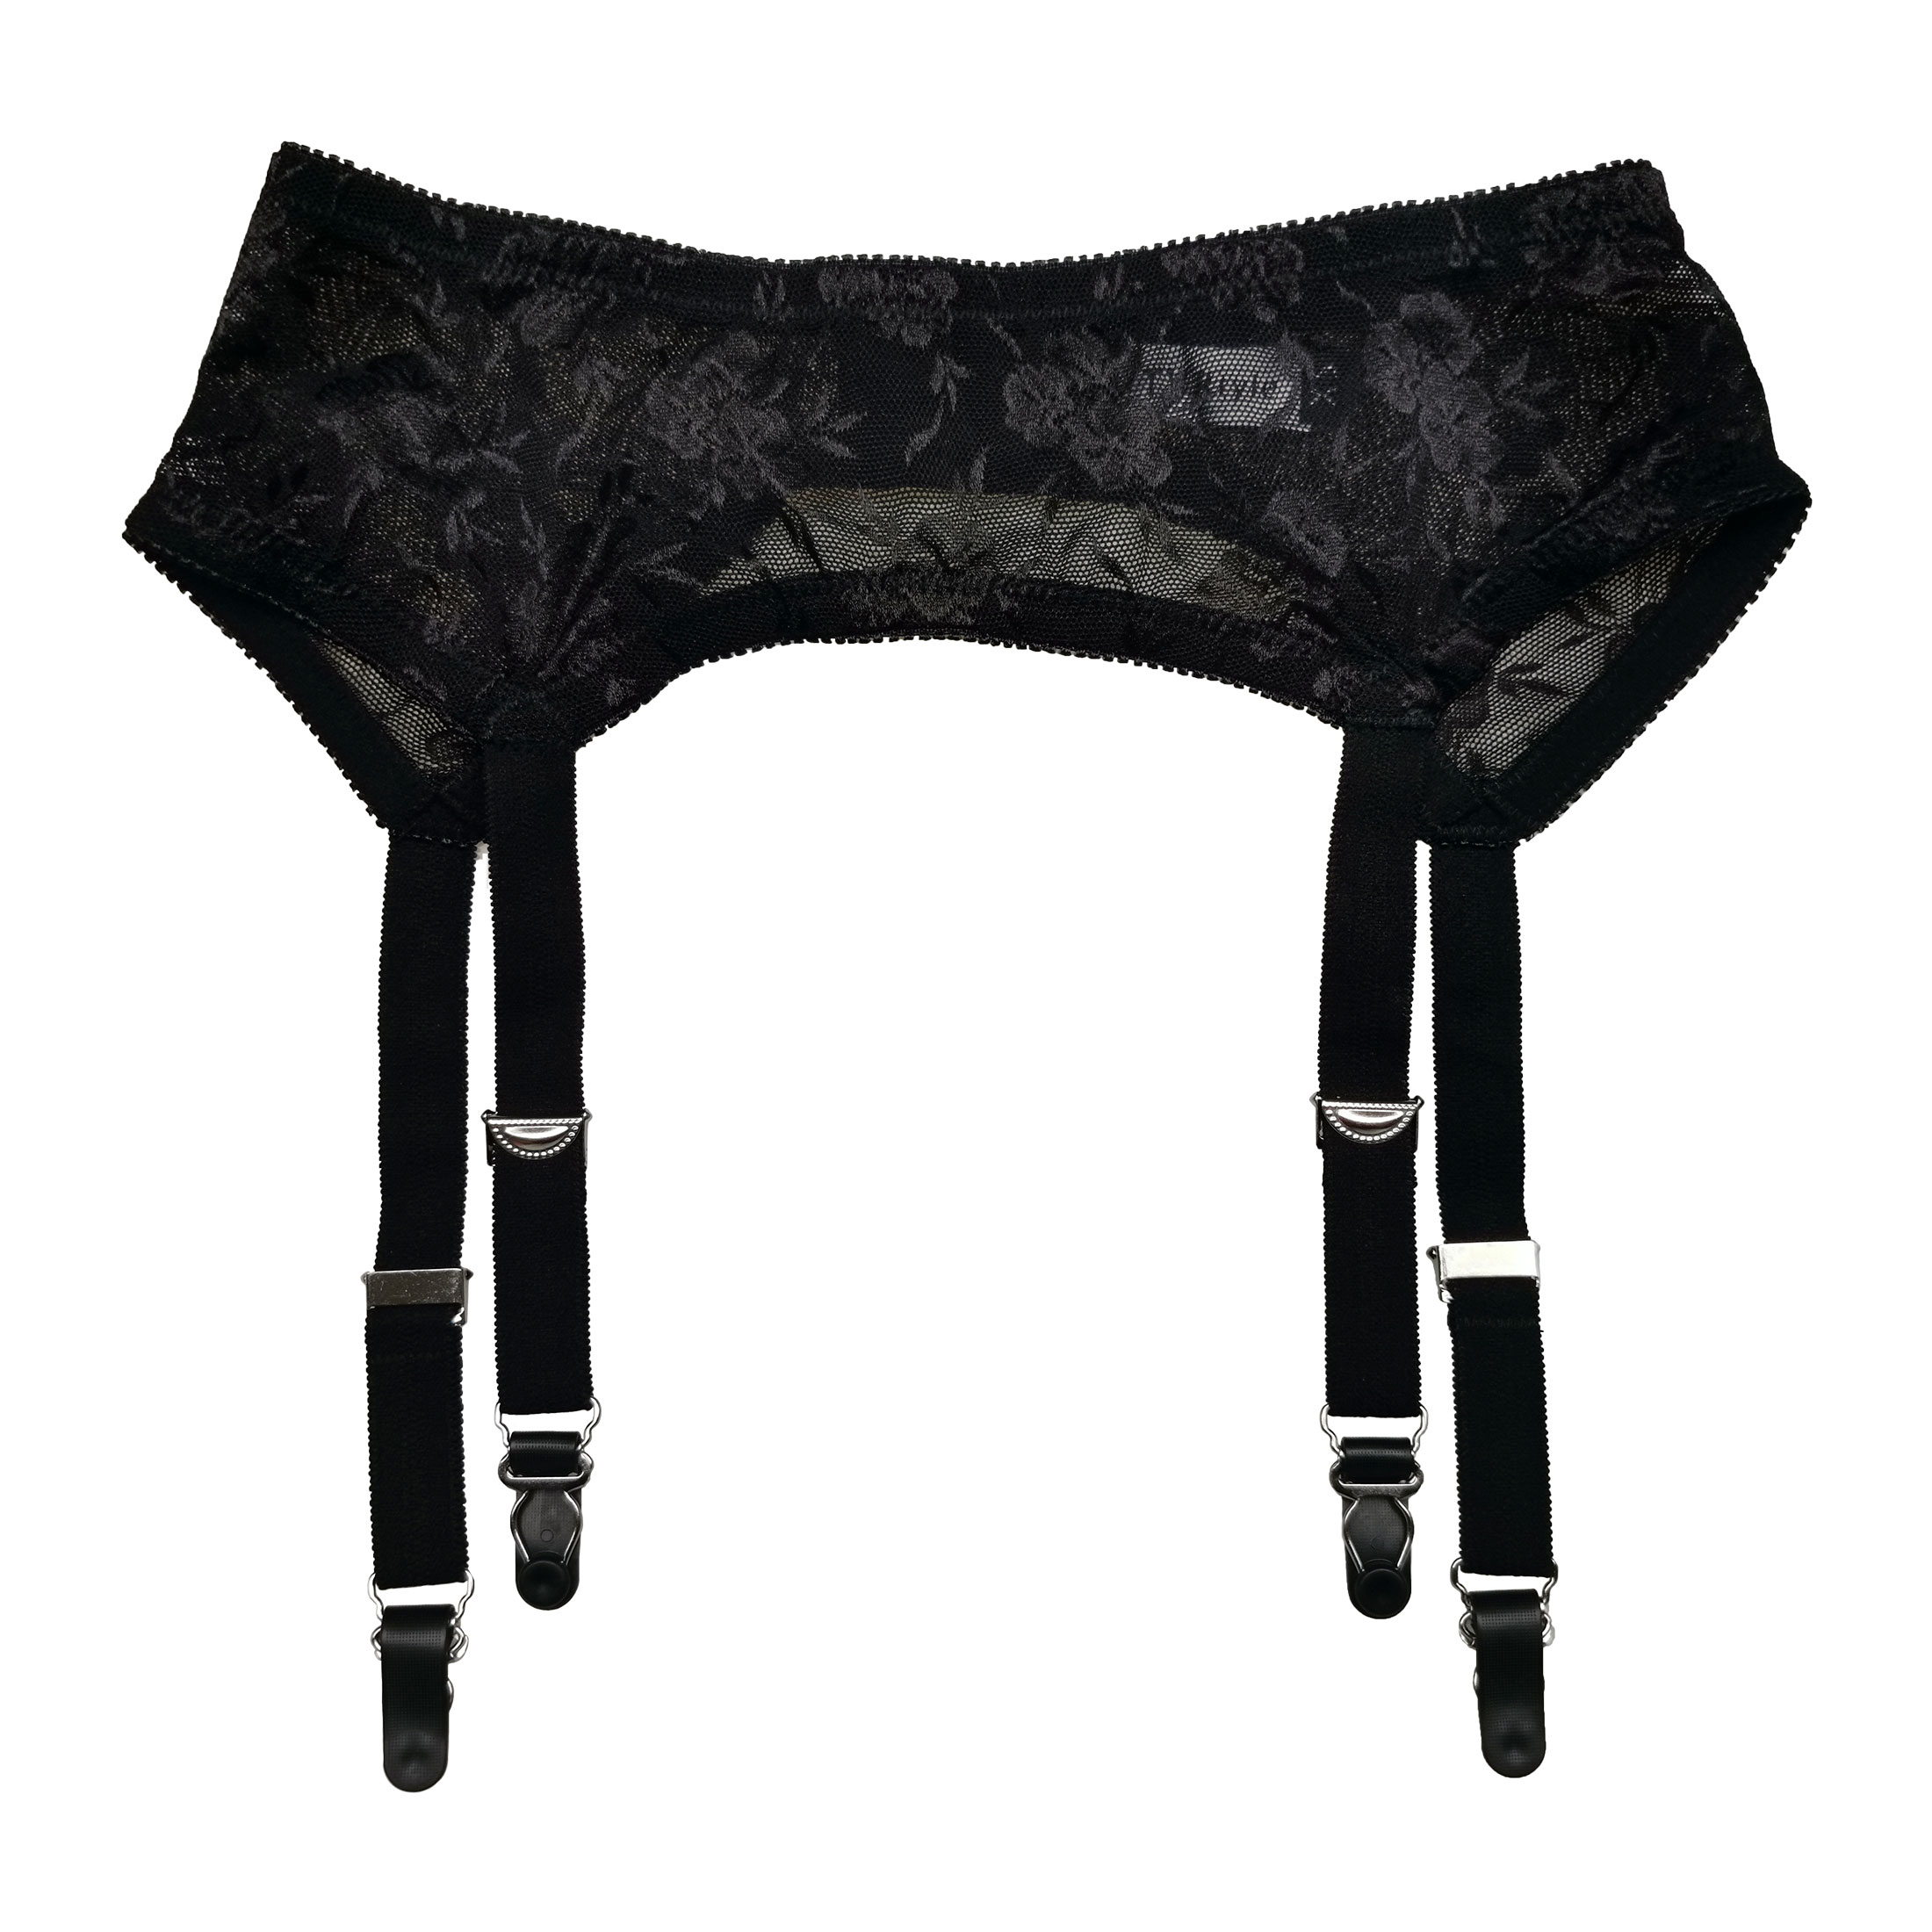 Tvrtyle Women S Mysterious Sexy Black 4 Vintage Metal Clips Garter Belts For Stockings